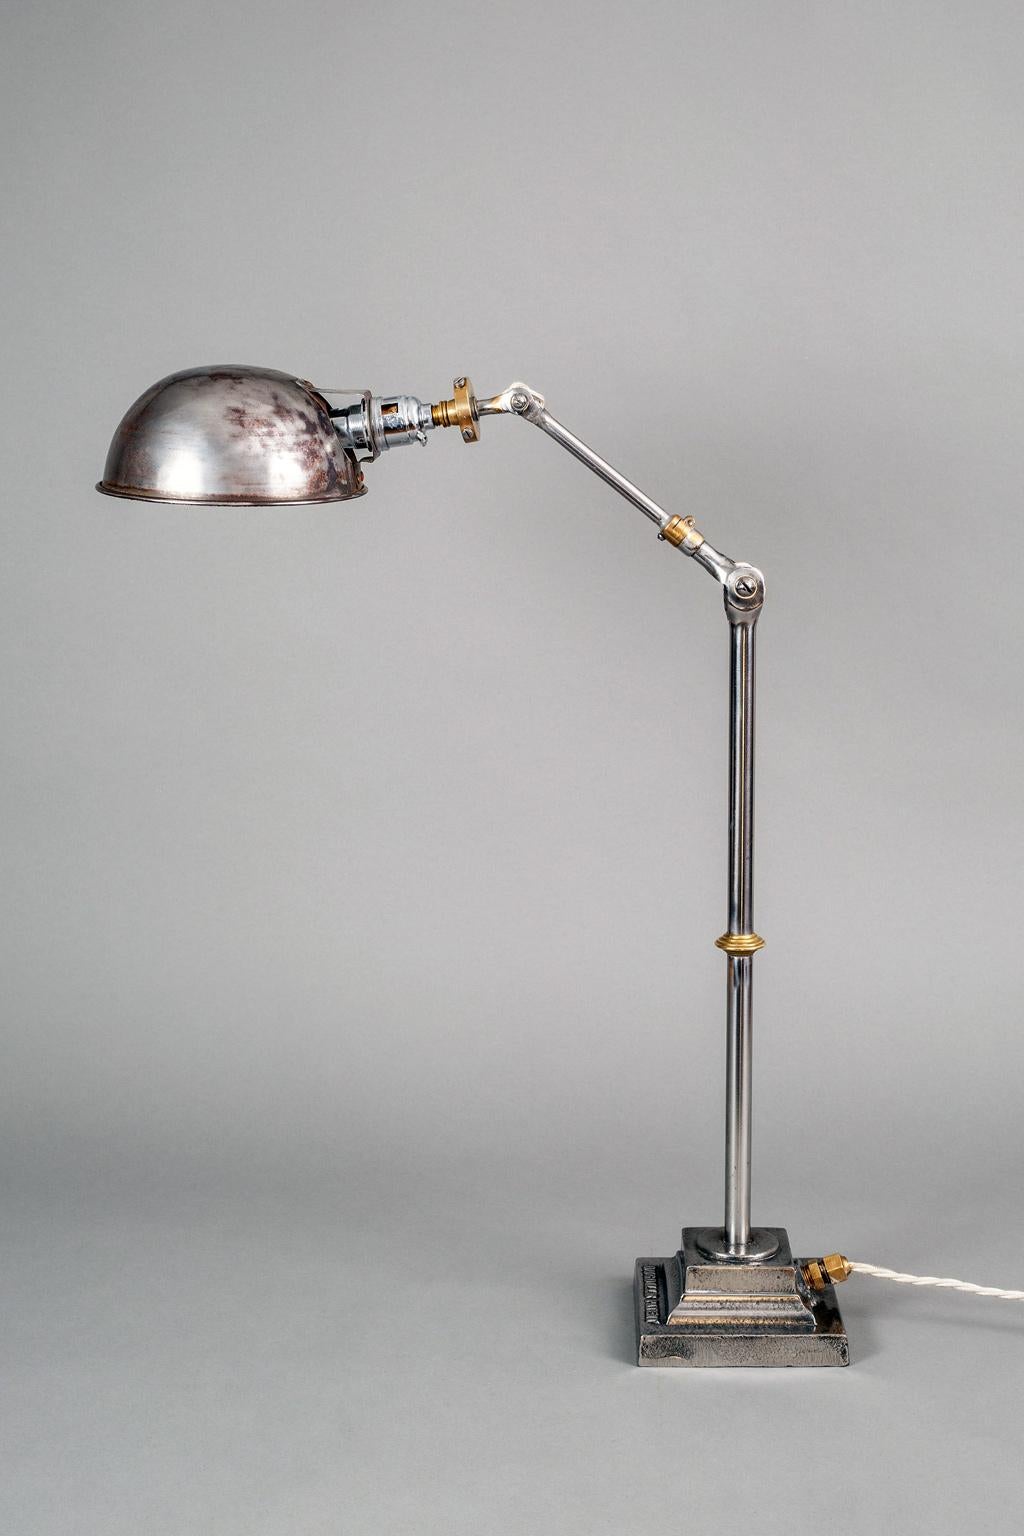 Steel and brass English industrial style reticulated work desk lamp. It is marked Dugdills patent on the base. The height is adjustable from 19